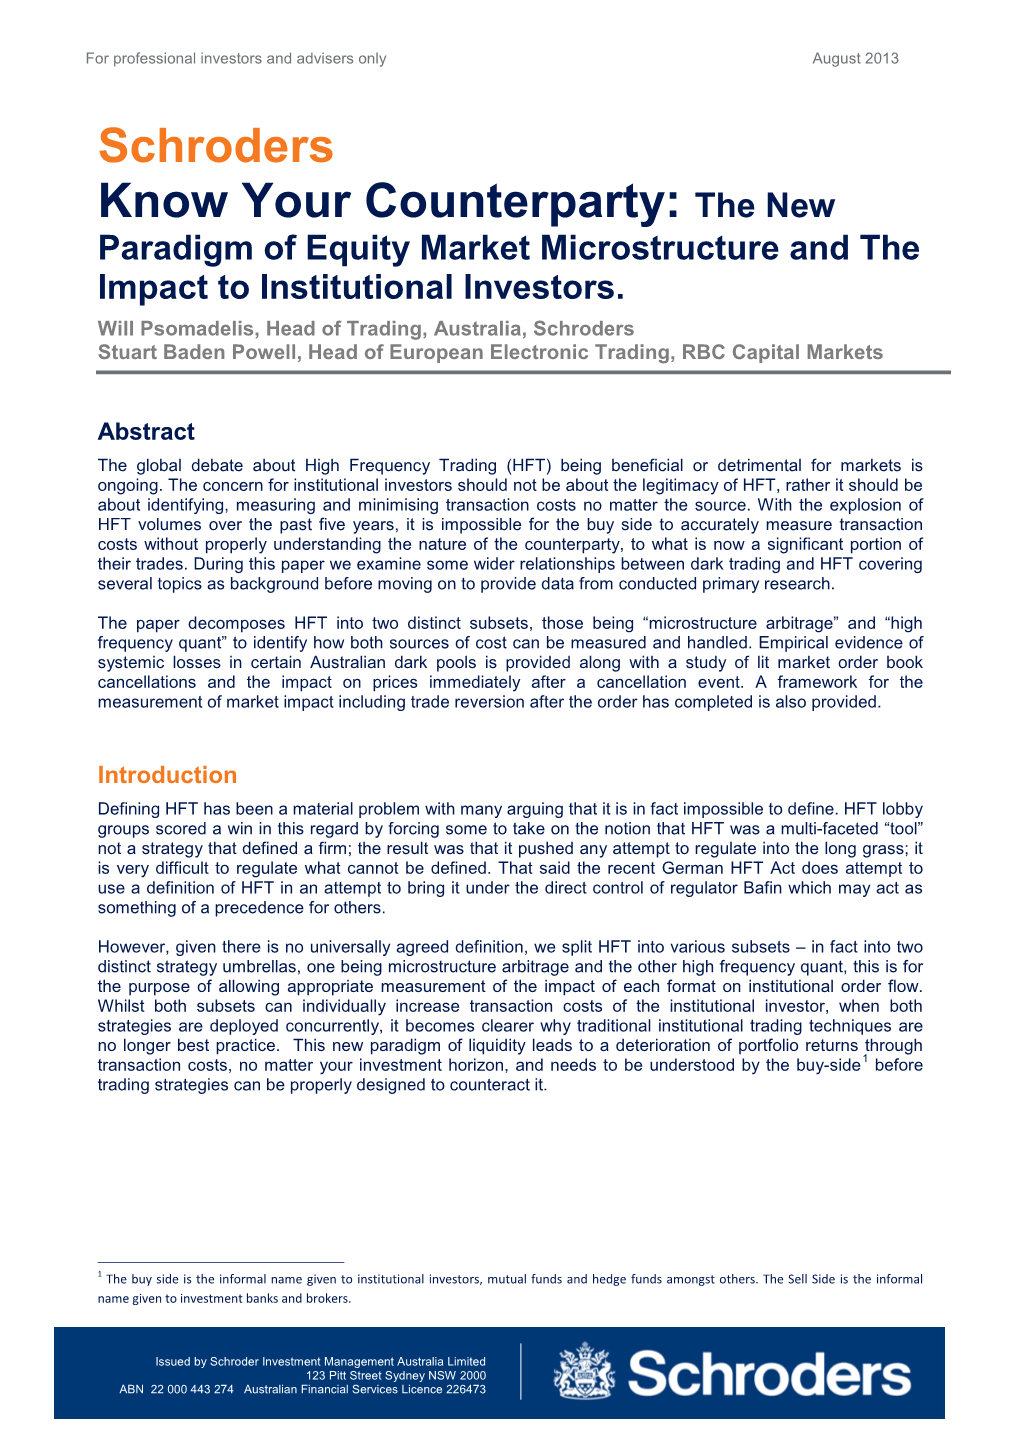 Schroders Know Your Counterparty: the New Paradigm of Equity Market Microstructure and the Impact to Institutional Investors